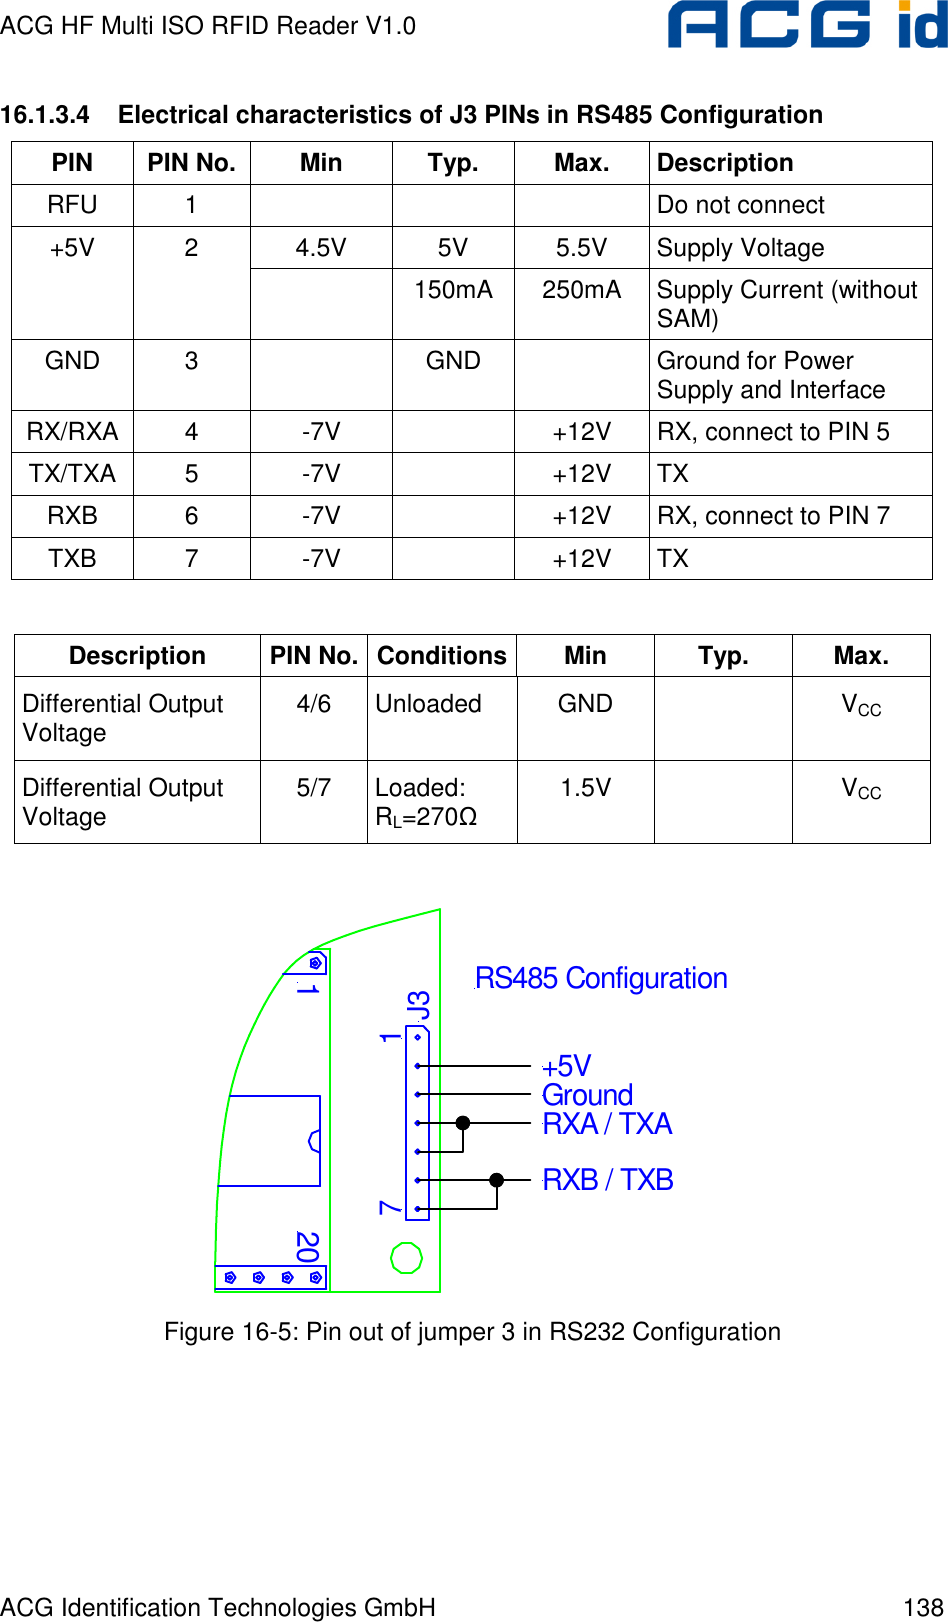 ACG HF Multi ISO RFID Reader V1.0 ACG Identification Technologies GmbH  138 16.1.3.4  Electrical characteristics of J3 PINs in RS485 Configuration PIN  PIN No.  Min  Typ.  Max.  Description RFU  1        Do not connect 4.5V  5V  5.5V  Supply Voltage +5V  2   150mA  250mA  Supply Current (without SAM) GND  3    GND    Ground for Power Supply and Interface RX/RXA 4  -7V    +12V  RX, connect to PIN 5 TX/TXA  5  -7V    +12V  TX RXB  6  -7V    +12V  RX, connect to PIN 7 TXB  7  -7V    +12V  TX  Description  PIN No. Conditions Min  Typ.  Max. Differential Output Voltage  4/6  Unloaded  GND    VCC Differential Output Voltage  5/7  Loaded: RL=270Ω 1.5V    VCC  12017J3+5VGroundRXA / TXARXB / TXBRS485 Configuration Figure 16-5: Pin out of jumper 3 in RS232 Configuration  